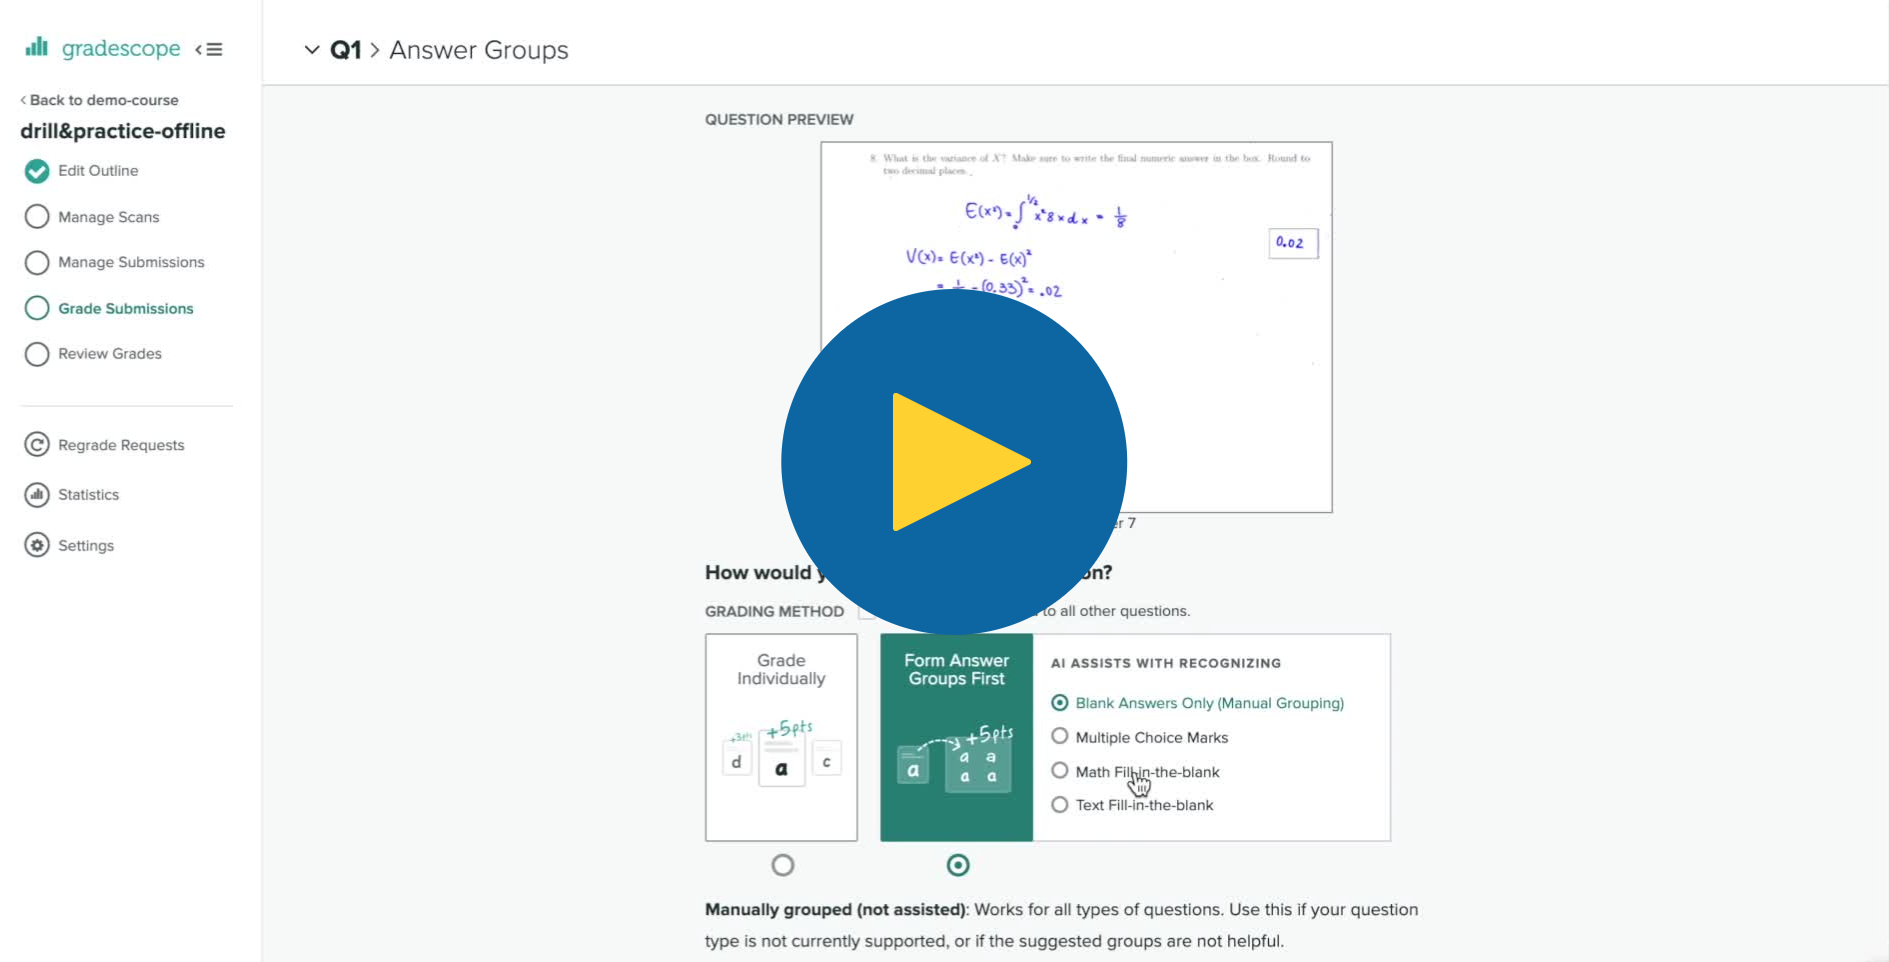 The video shows an example of how the AI-assisted grouping in Gradescope works. In the example, the AI tool automatically groups 6 answers into 3 groups and leaves 2 answers ungrouped. The grader browses the groups that were formed and confirms that the grouping was done correctly. Then the grader groups the 2 answers that were left ungrouped. Now 8 answers have been divided into 4 groups. The grader only needs to grade the 4 groups, and automatically all answers are given the feedback and mark corresponding to their group.